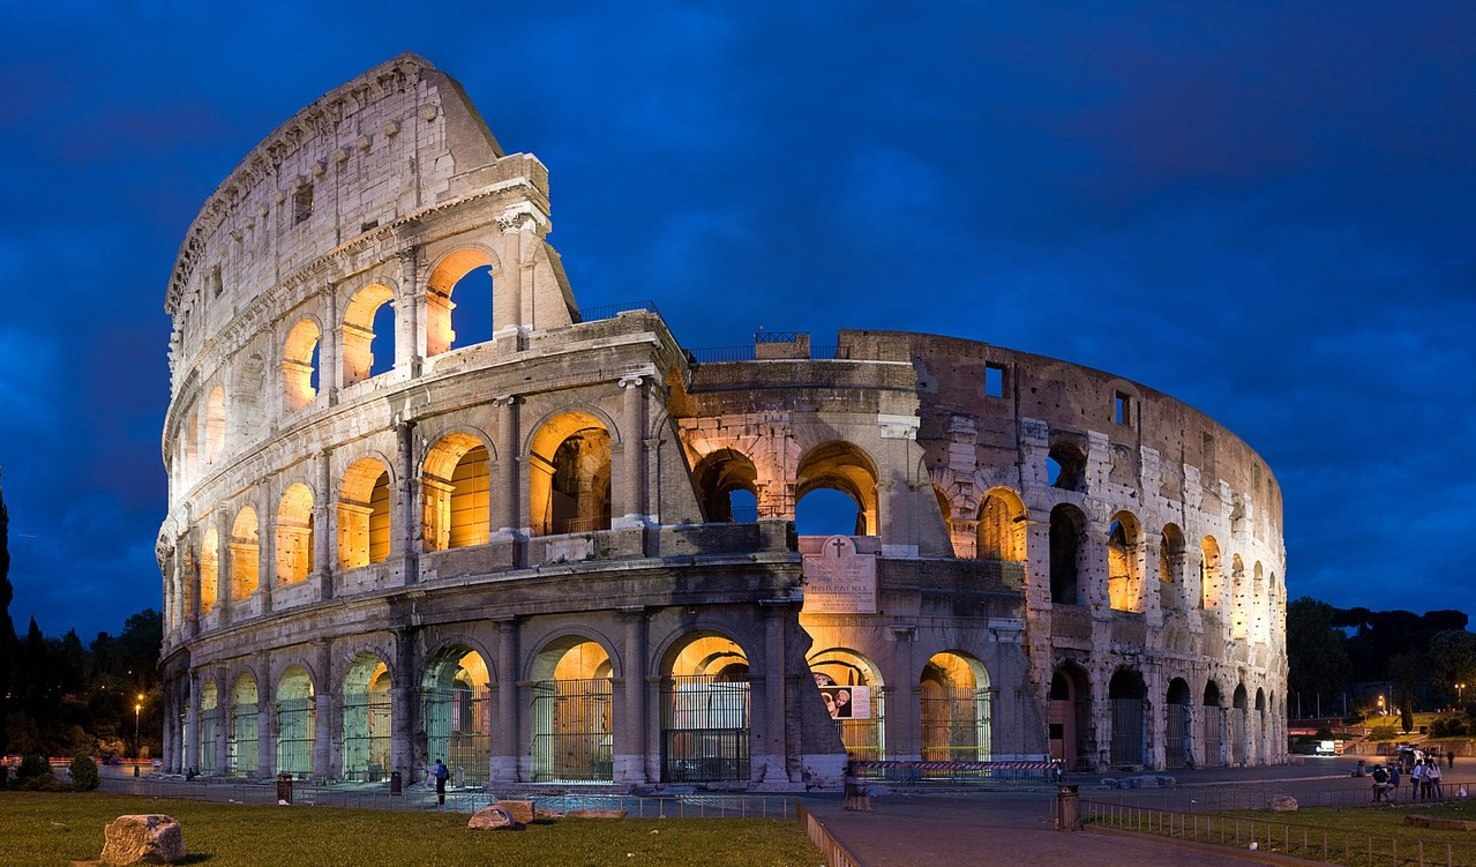 Large colosseum in rome